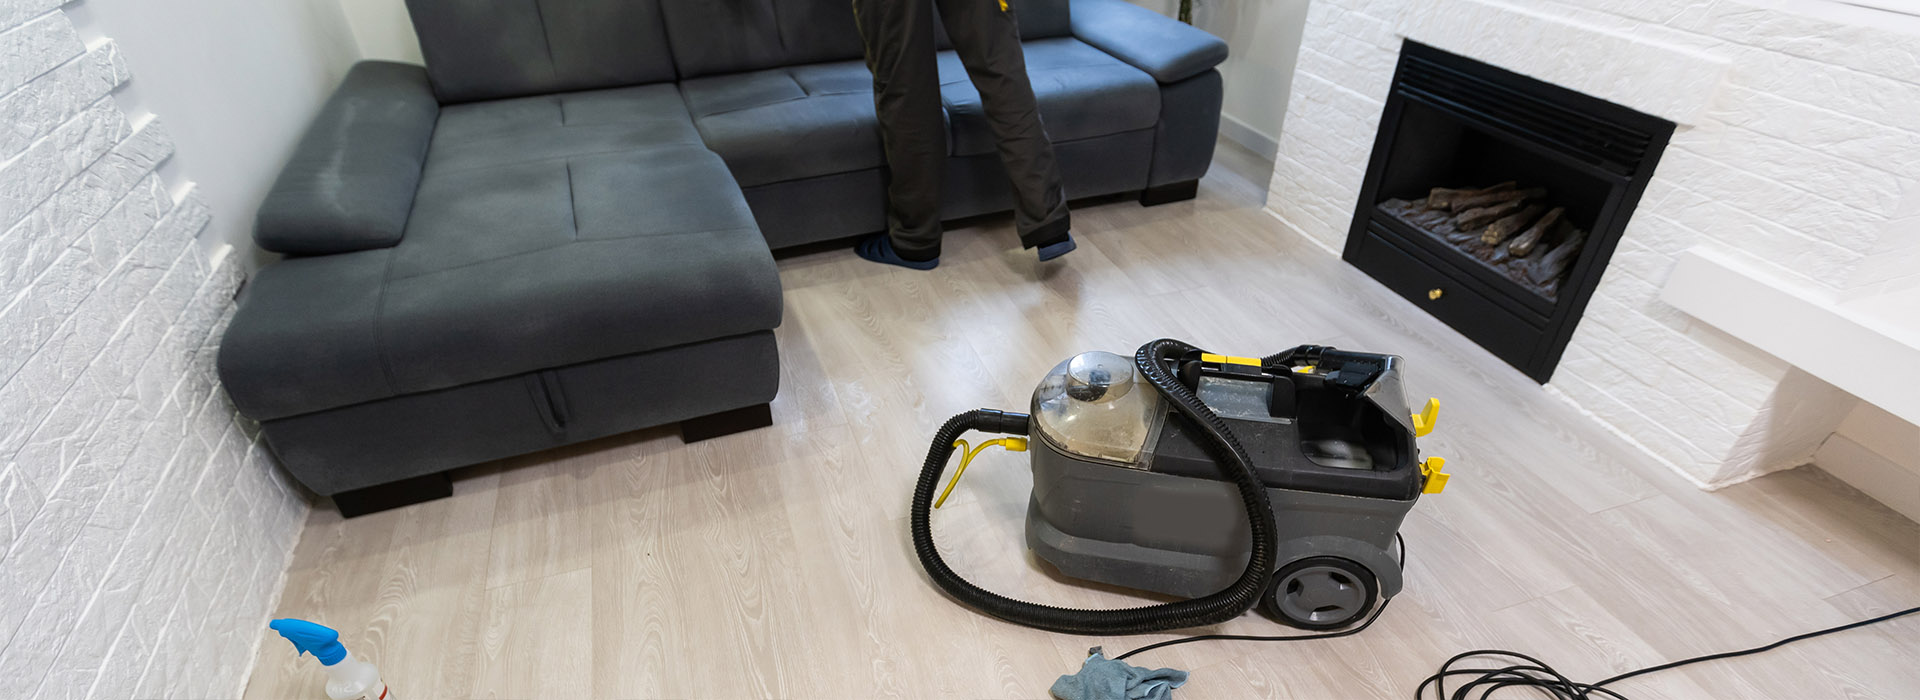 Sofa Cleaning | What to Consider When Cleaning Your Lounge